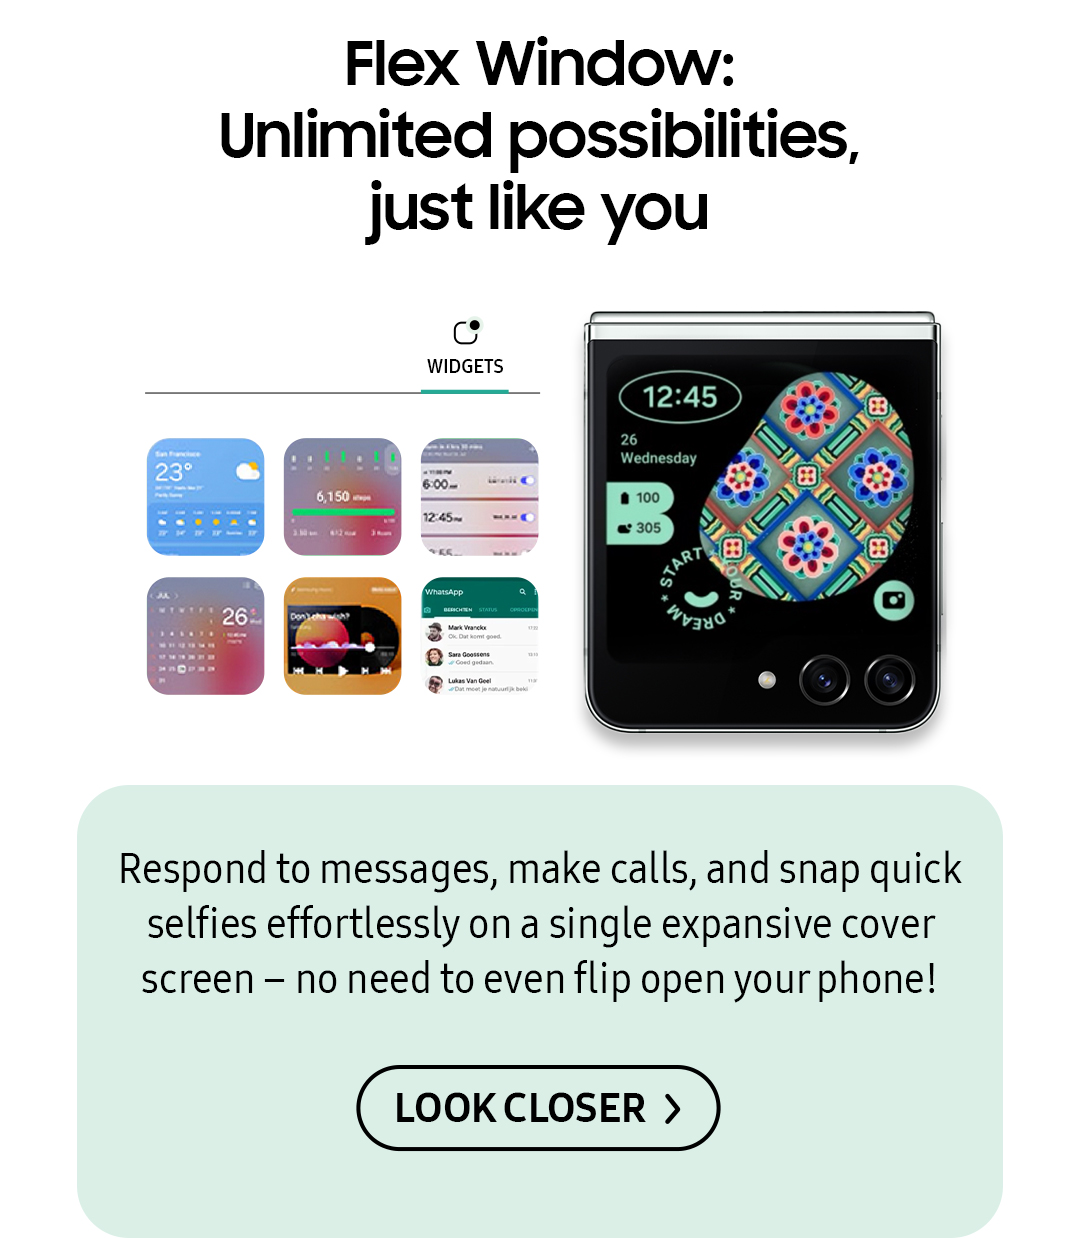 Flex Window: Unlimited possibilities, just like you | Respond to messages, make calls, and snap quick selfie effortlessly on a single expansive cover screen - no need to even flip open your phone! Click here to look closer!